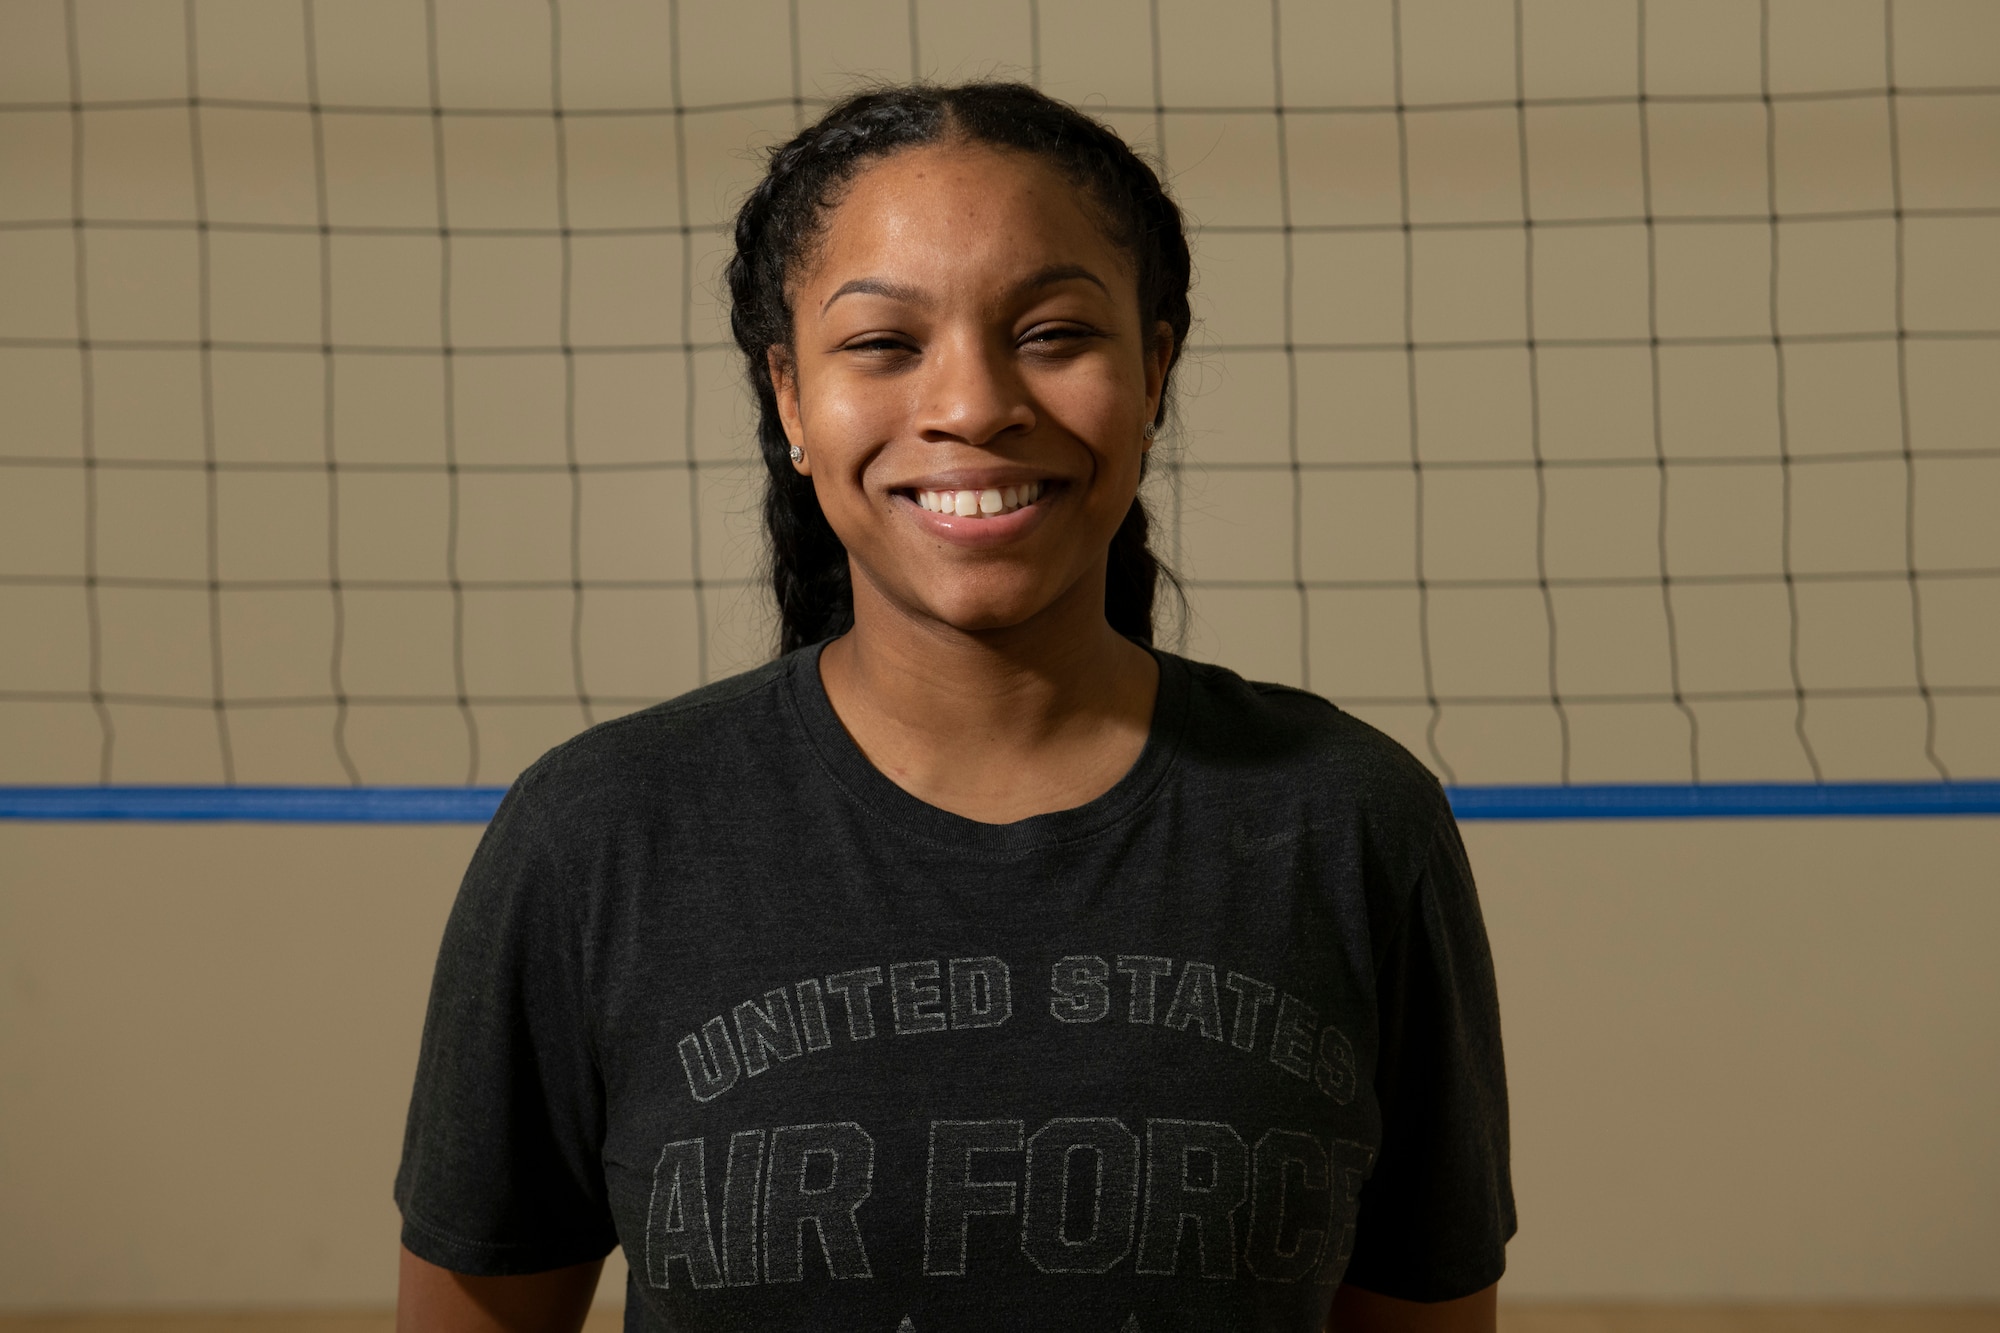 Senior Airman Jade Cairns, 60th Diagnostics and Therapeutics Squadron medical laboratory technician, poses for a photo at Travis Air Force Base, California, Feb. 15, 2019. Cairns applied and was accepted to play on the 2019 Air Force Women's Volleyball Team. (U.S. Air Force photo by Lan Kim)